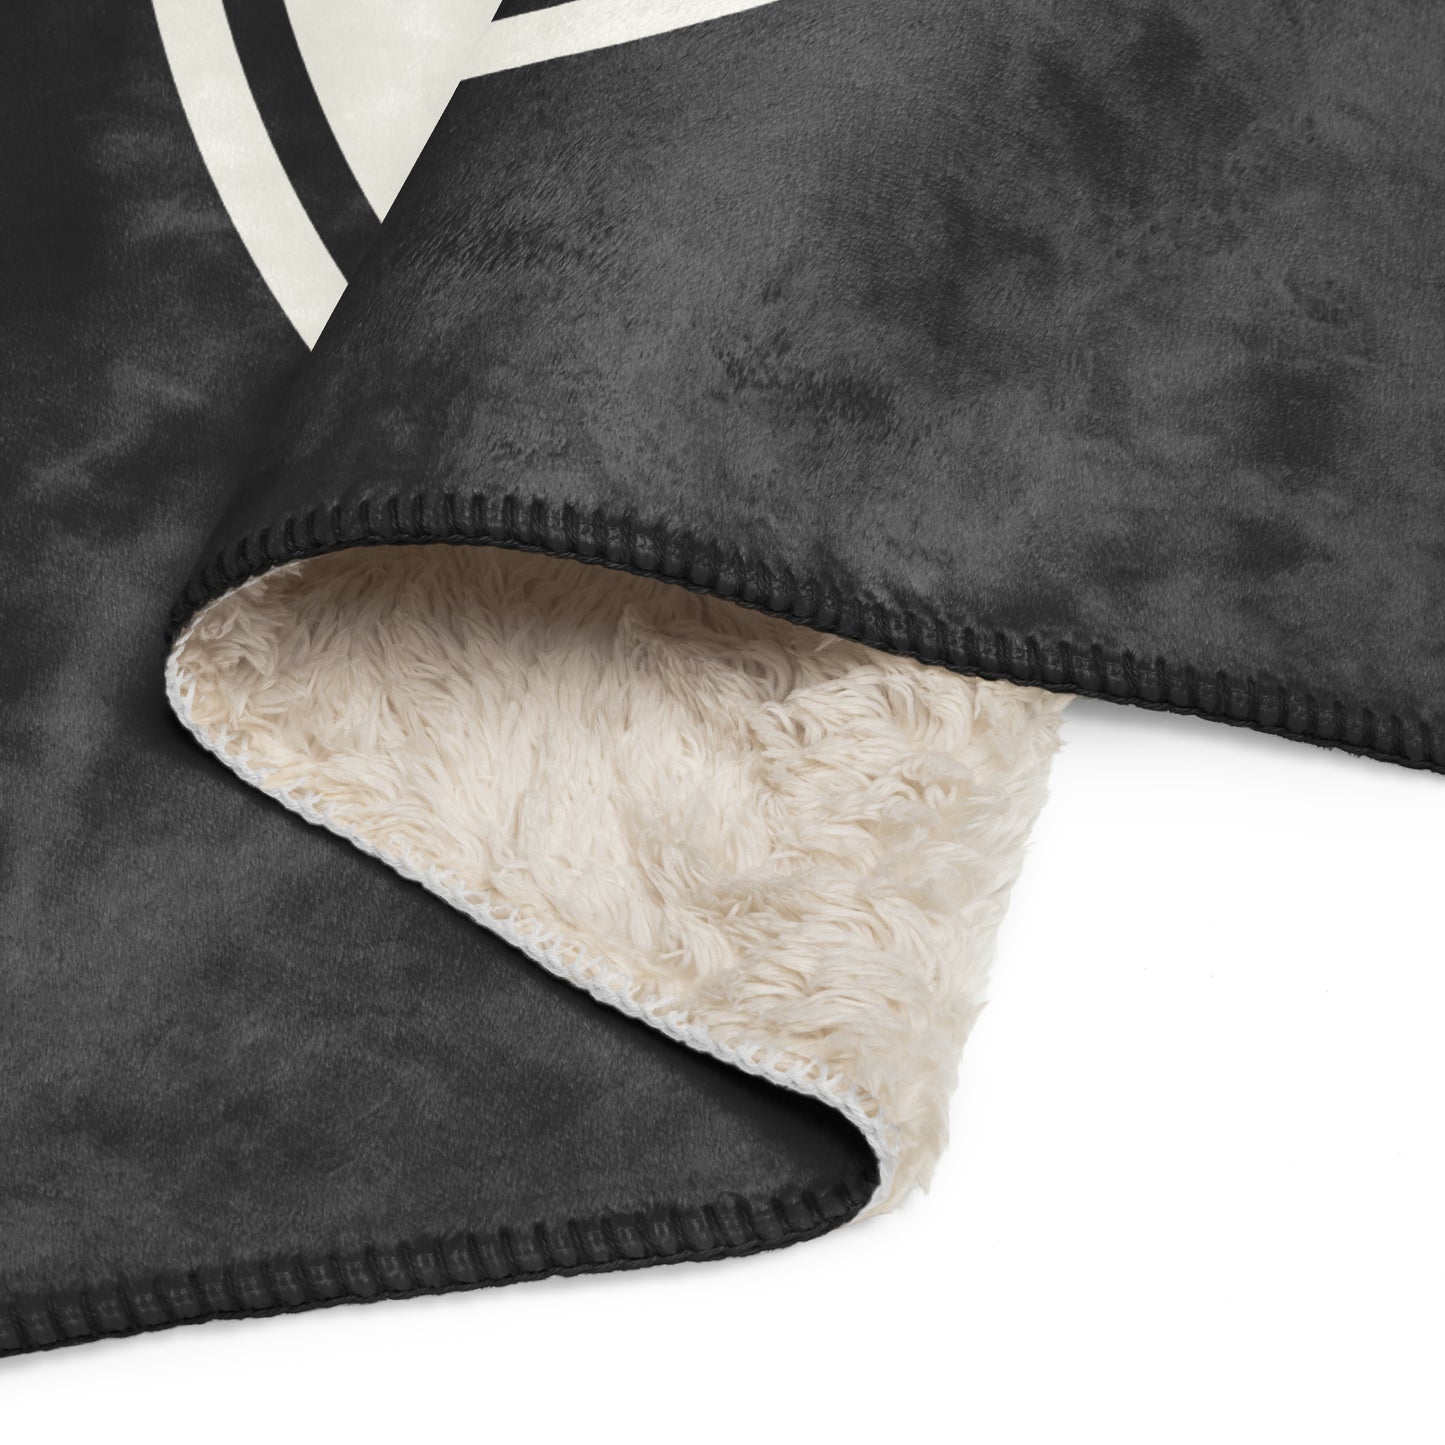 Unique Travel Gift Sherpa Blanket - White Oval • AMS Amsterdam • YHM Designs - Image 08